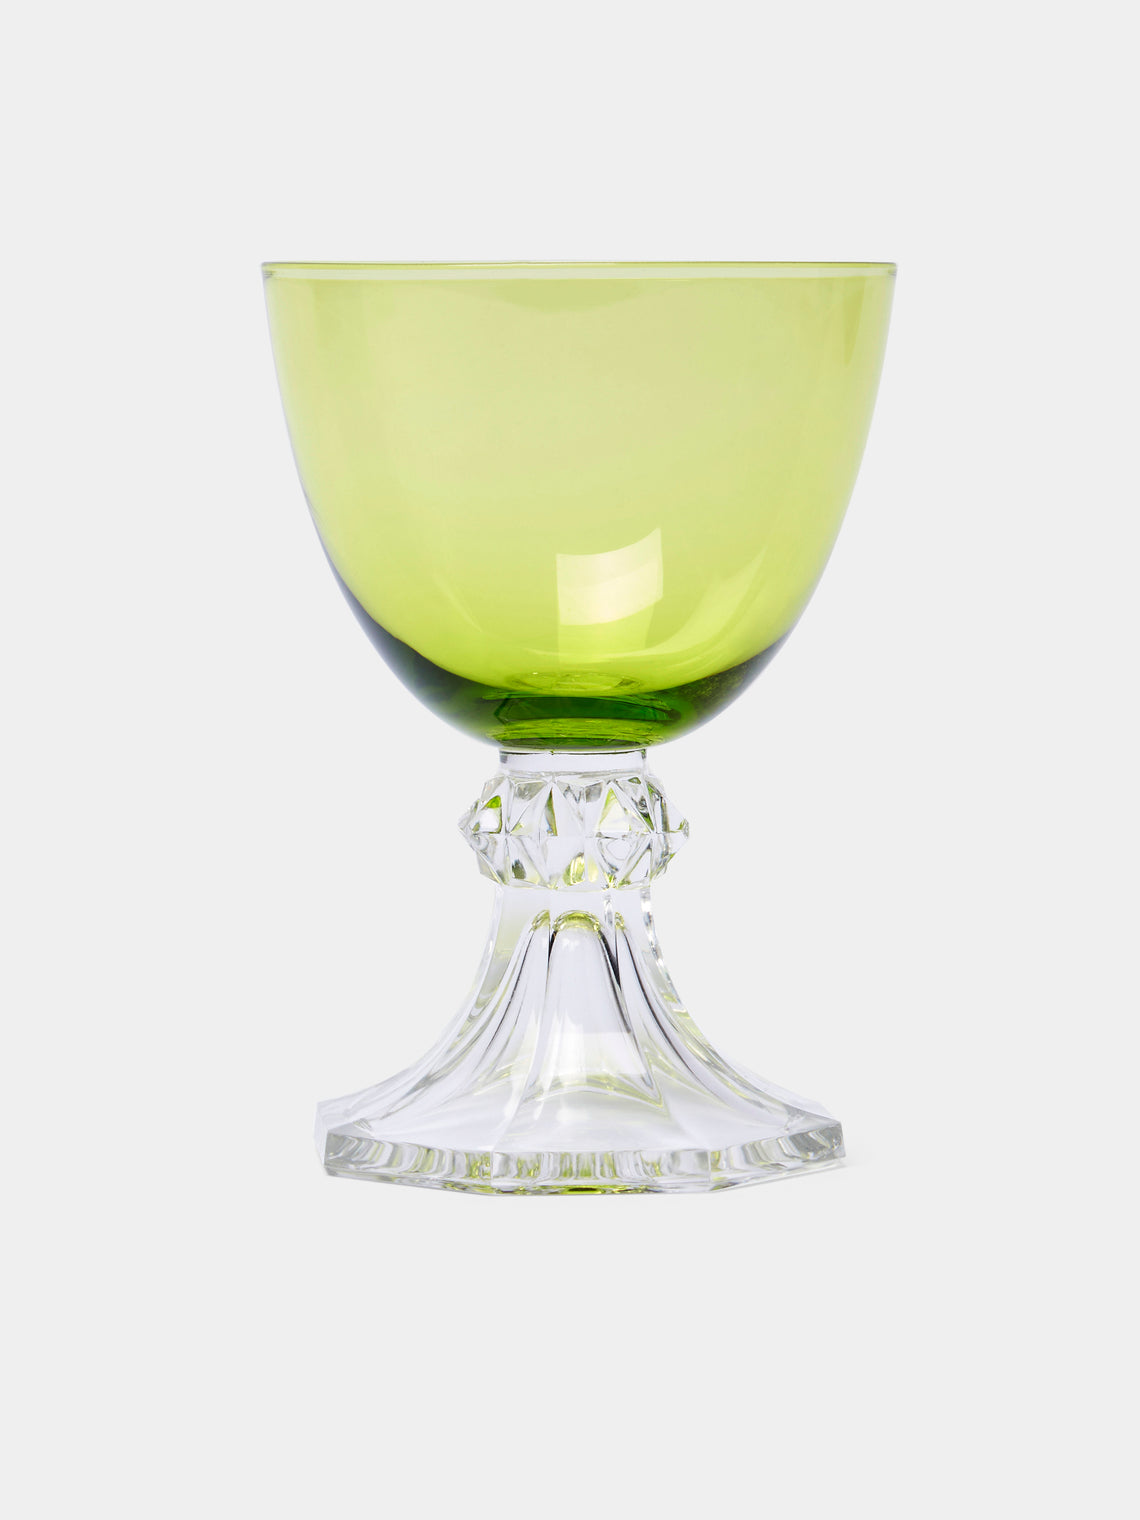 Antique and Vintage - 1930s Val Saint Lambert Crystal Wine Glass (Set of 10) - Green - ABASK - 